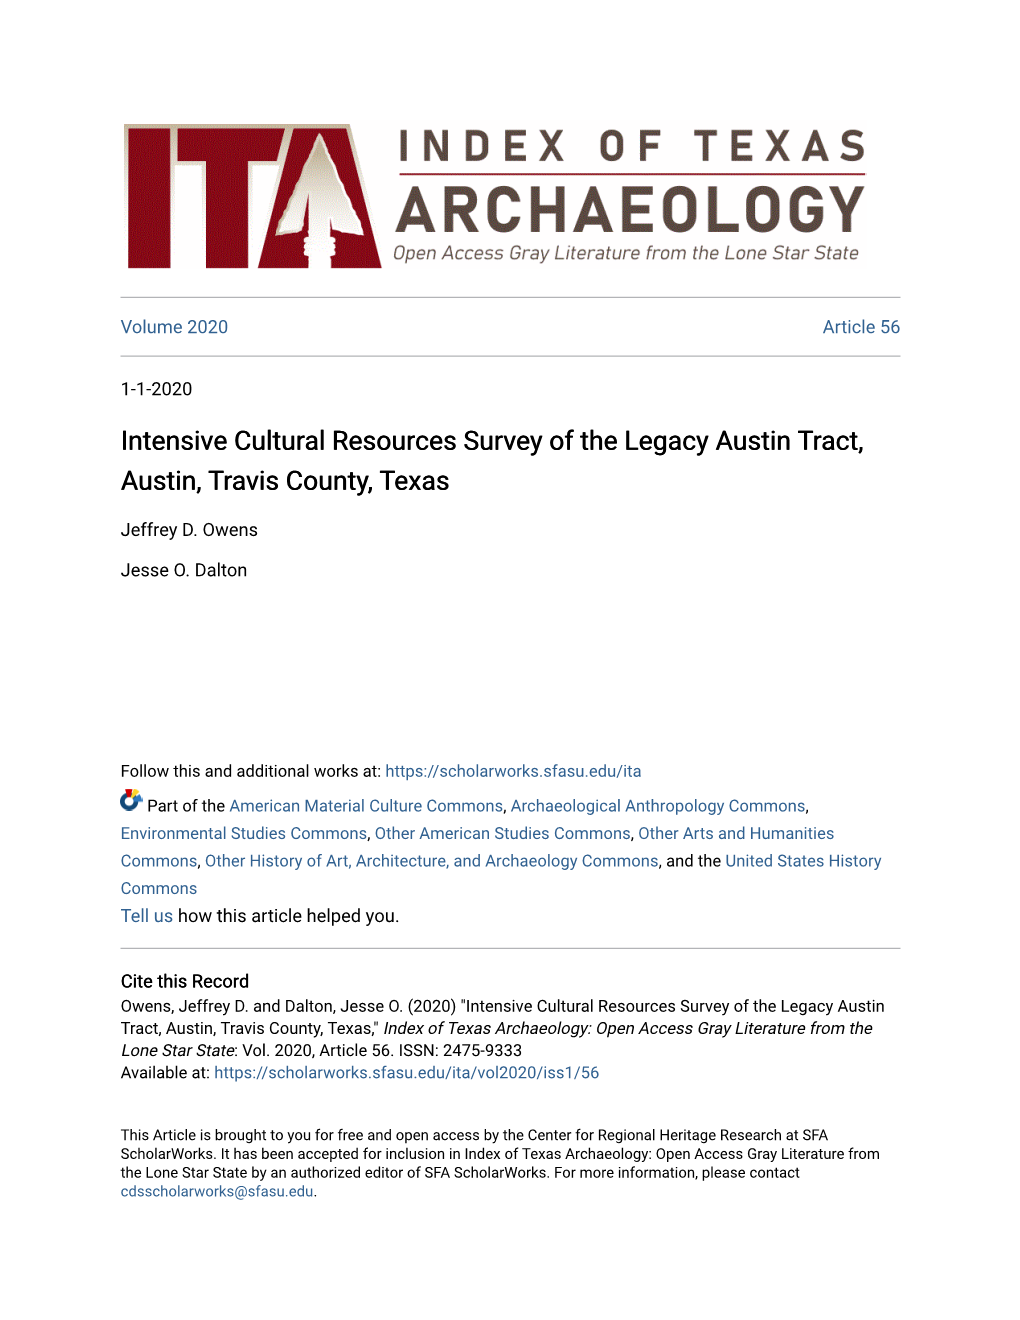 Intensive Cultural Resources Survey of the Legacy Austin Tract, Austin, Travis County, Texas